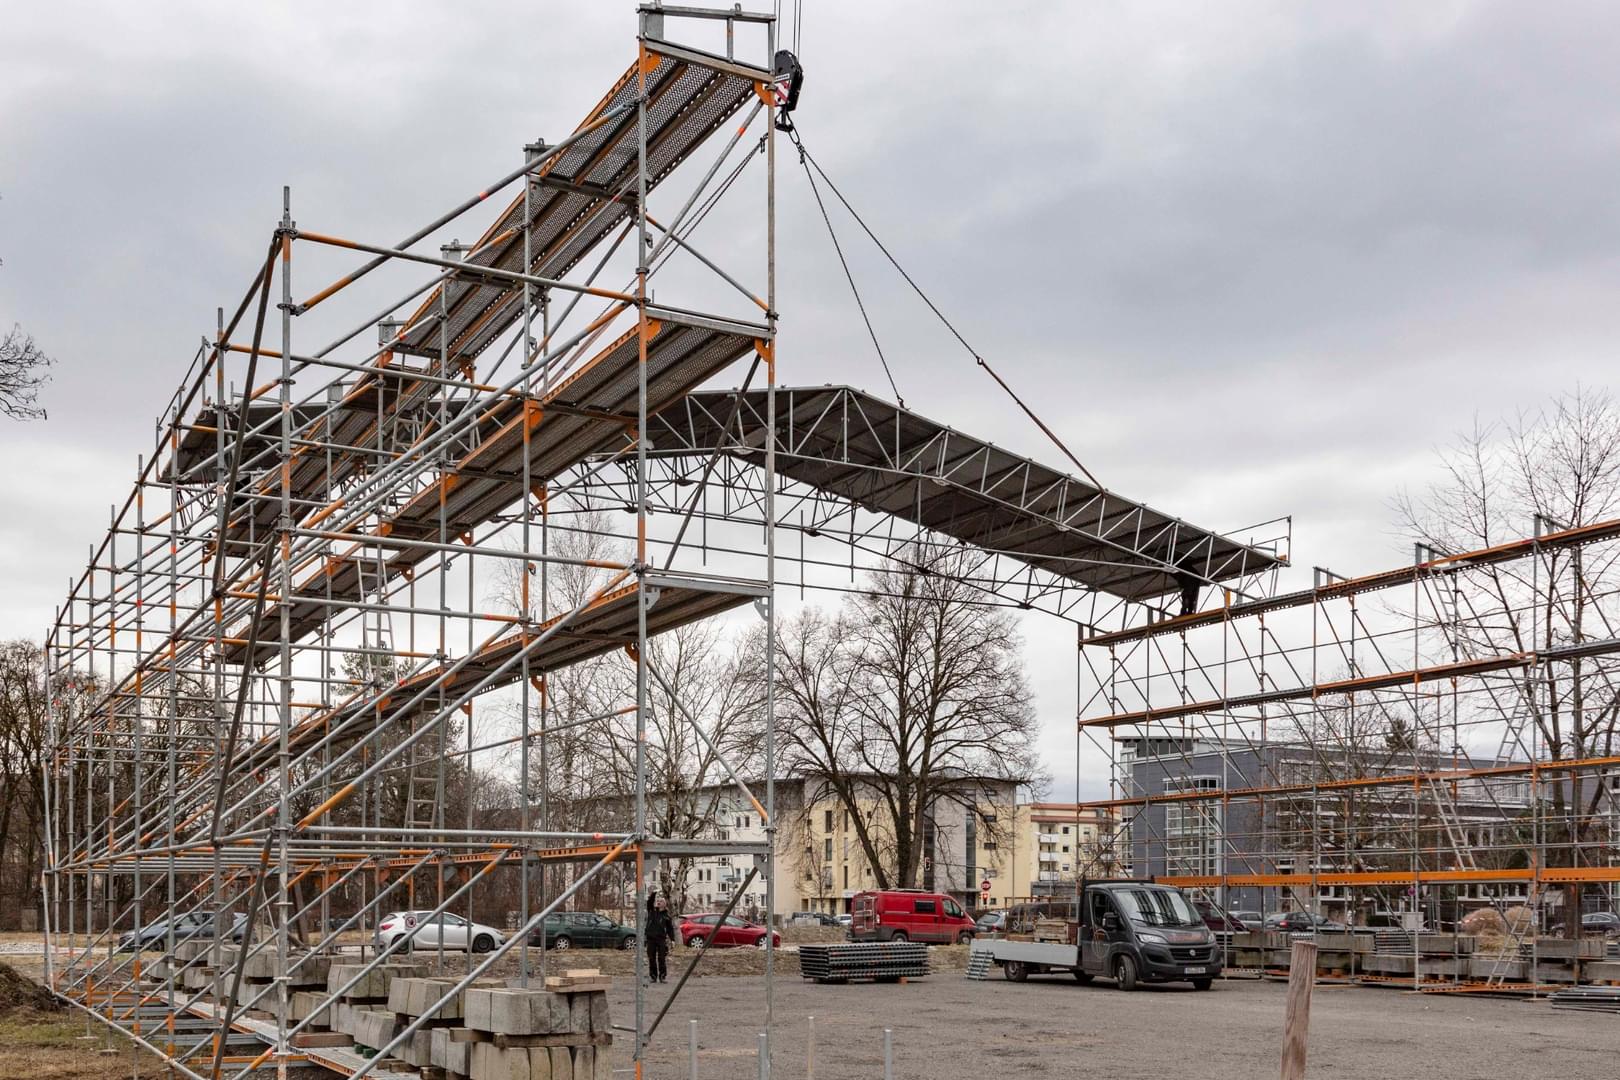 Erection of the scaffold